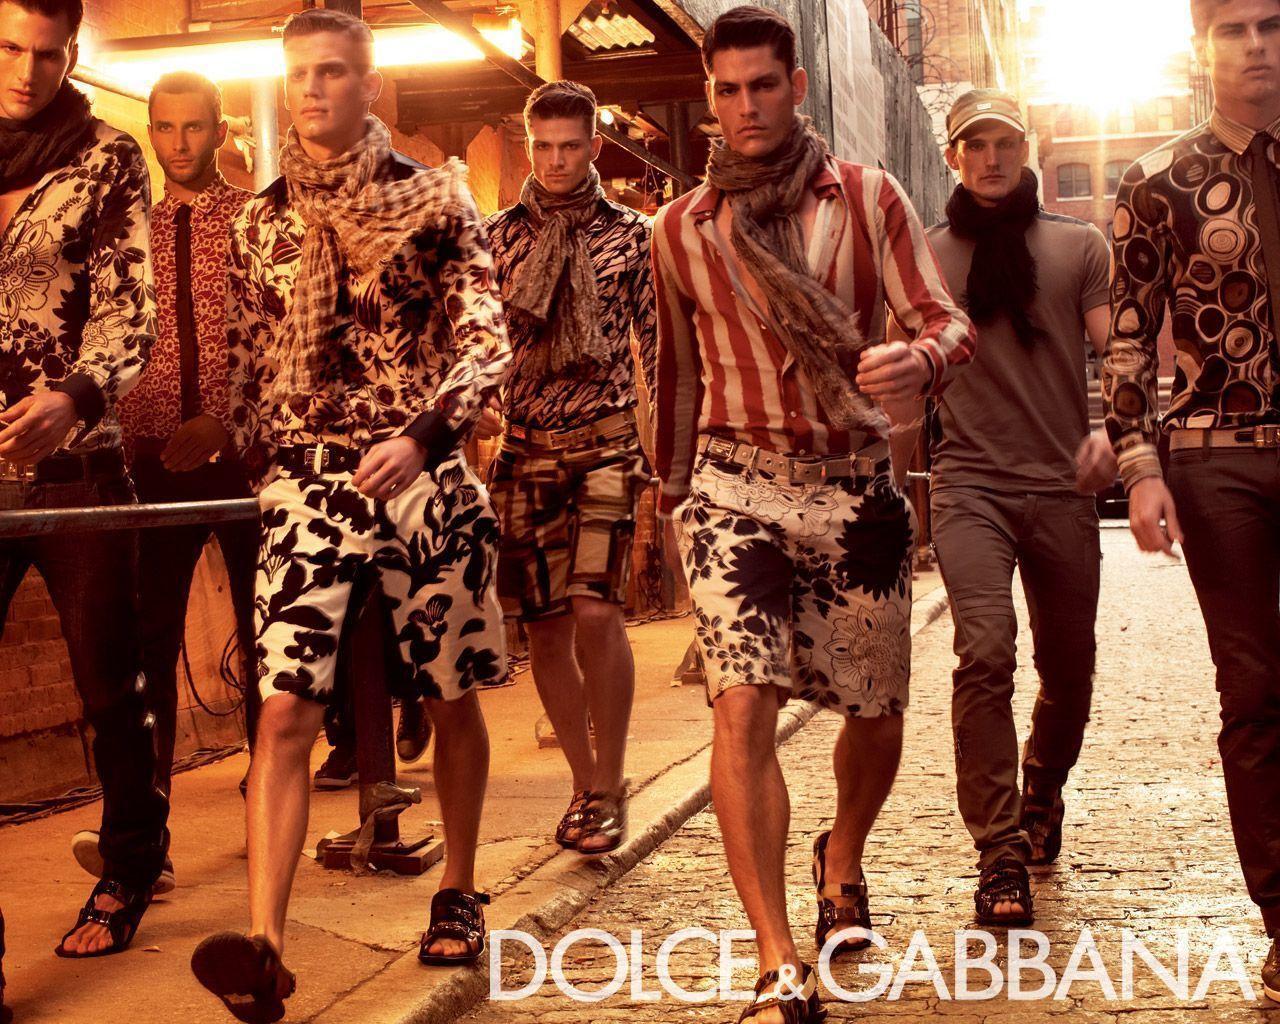 Dolce And Gabbana Wallpapers - Wallpaper Cave